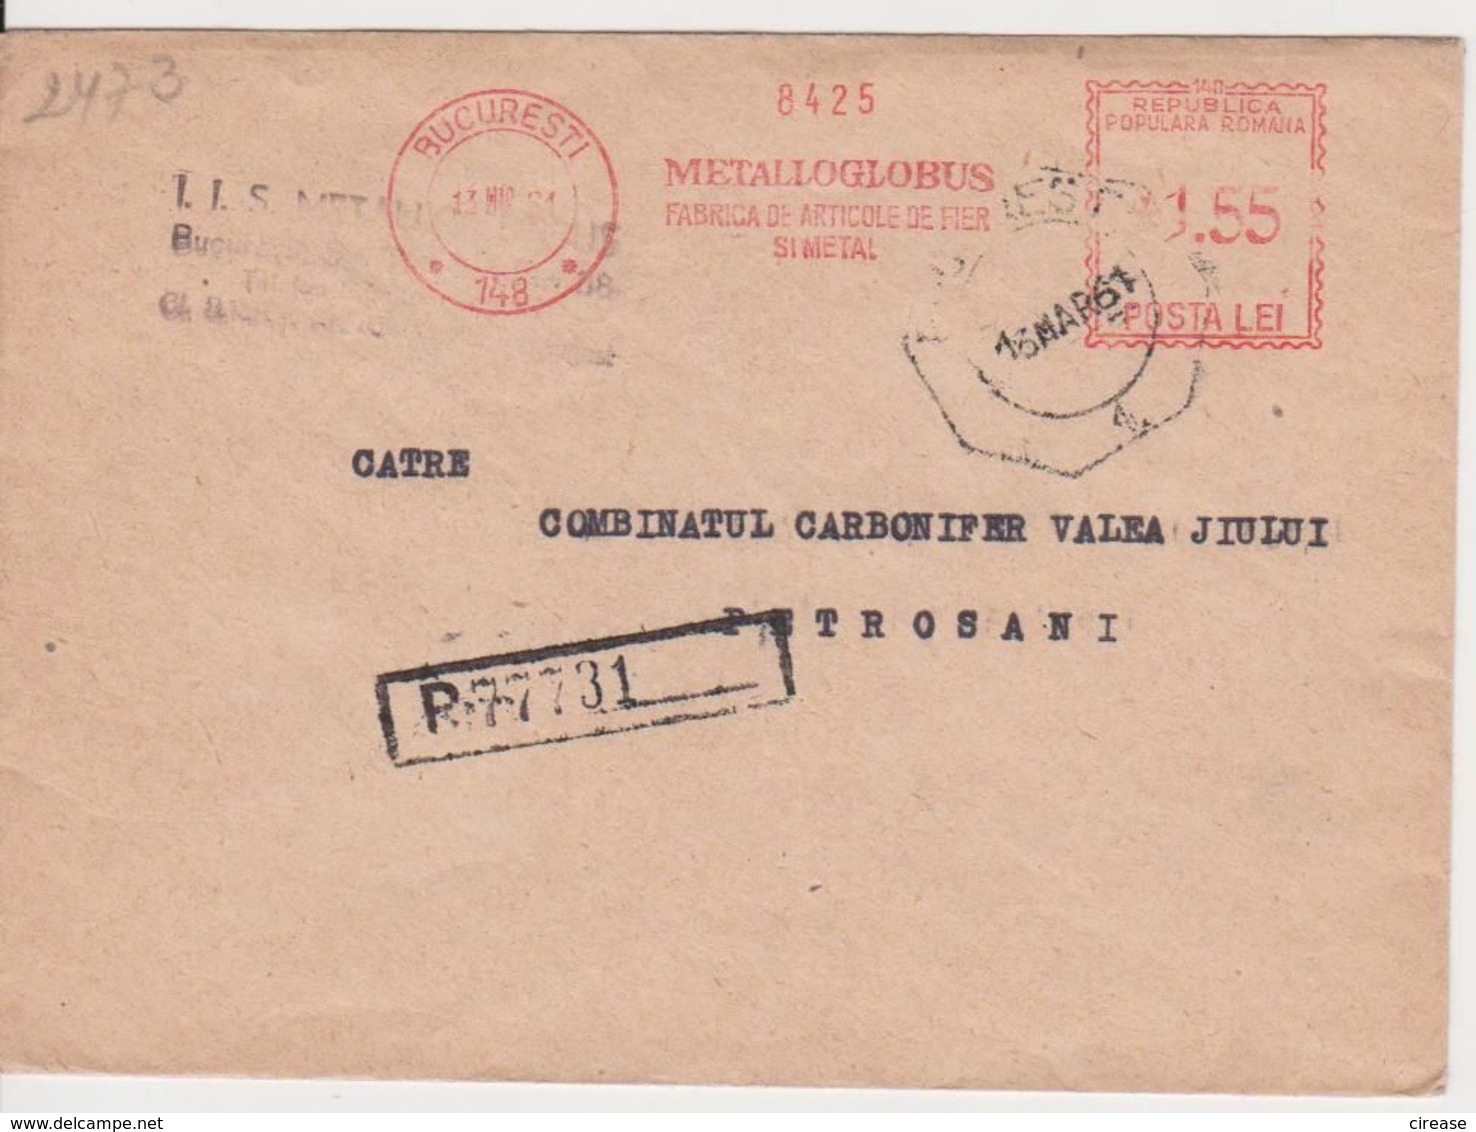 BUCURESTI AMONT 1,55,  METALLOGLOBUS METAL PRODUCTS FACTORY RED MACHINE ATM STAMPS, ROMANIA 1961 - Franking Machines (EMA)